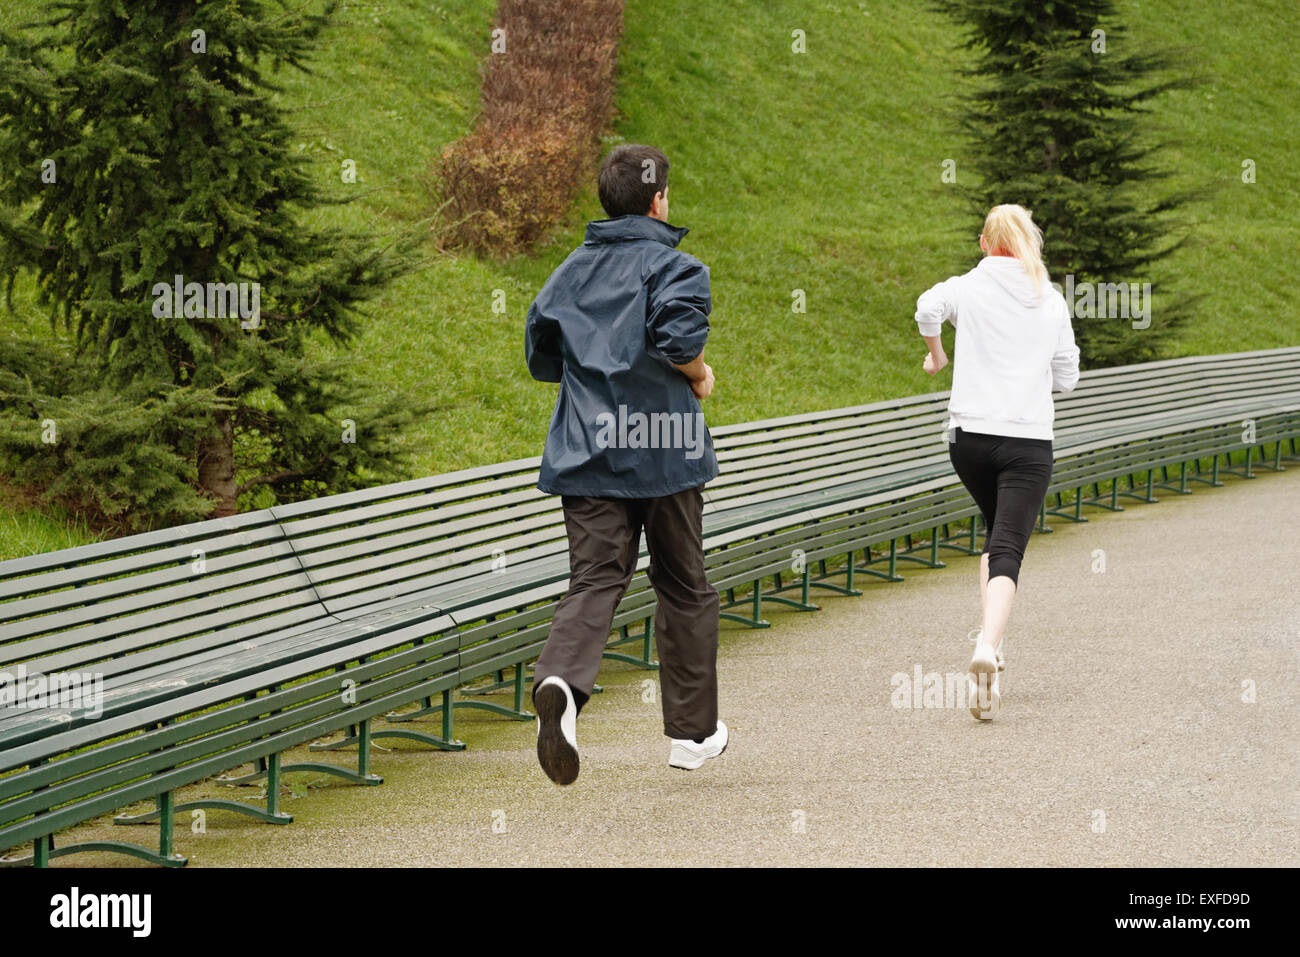 Man and woman running along pathway, rear view Stock Photo